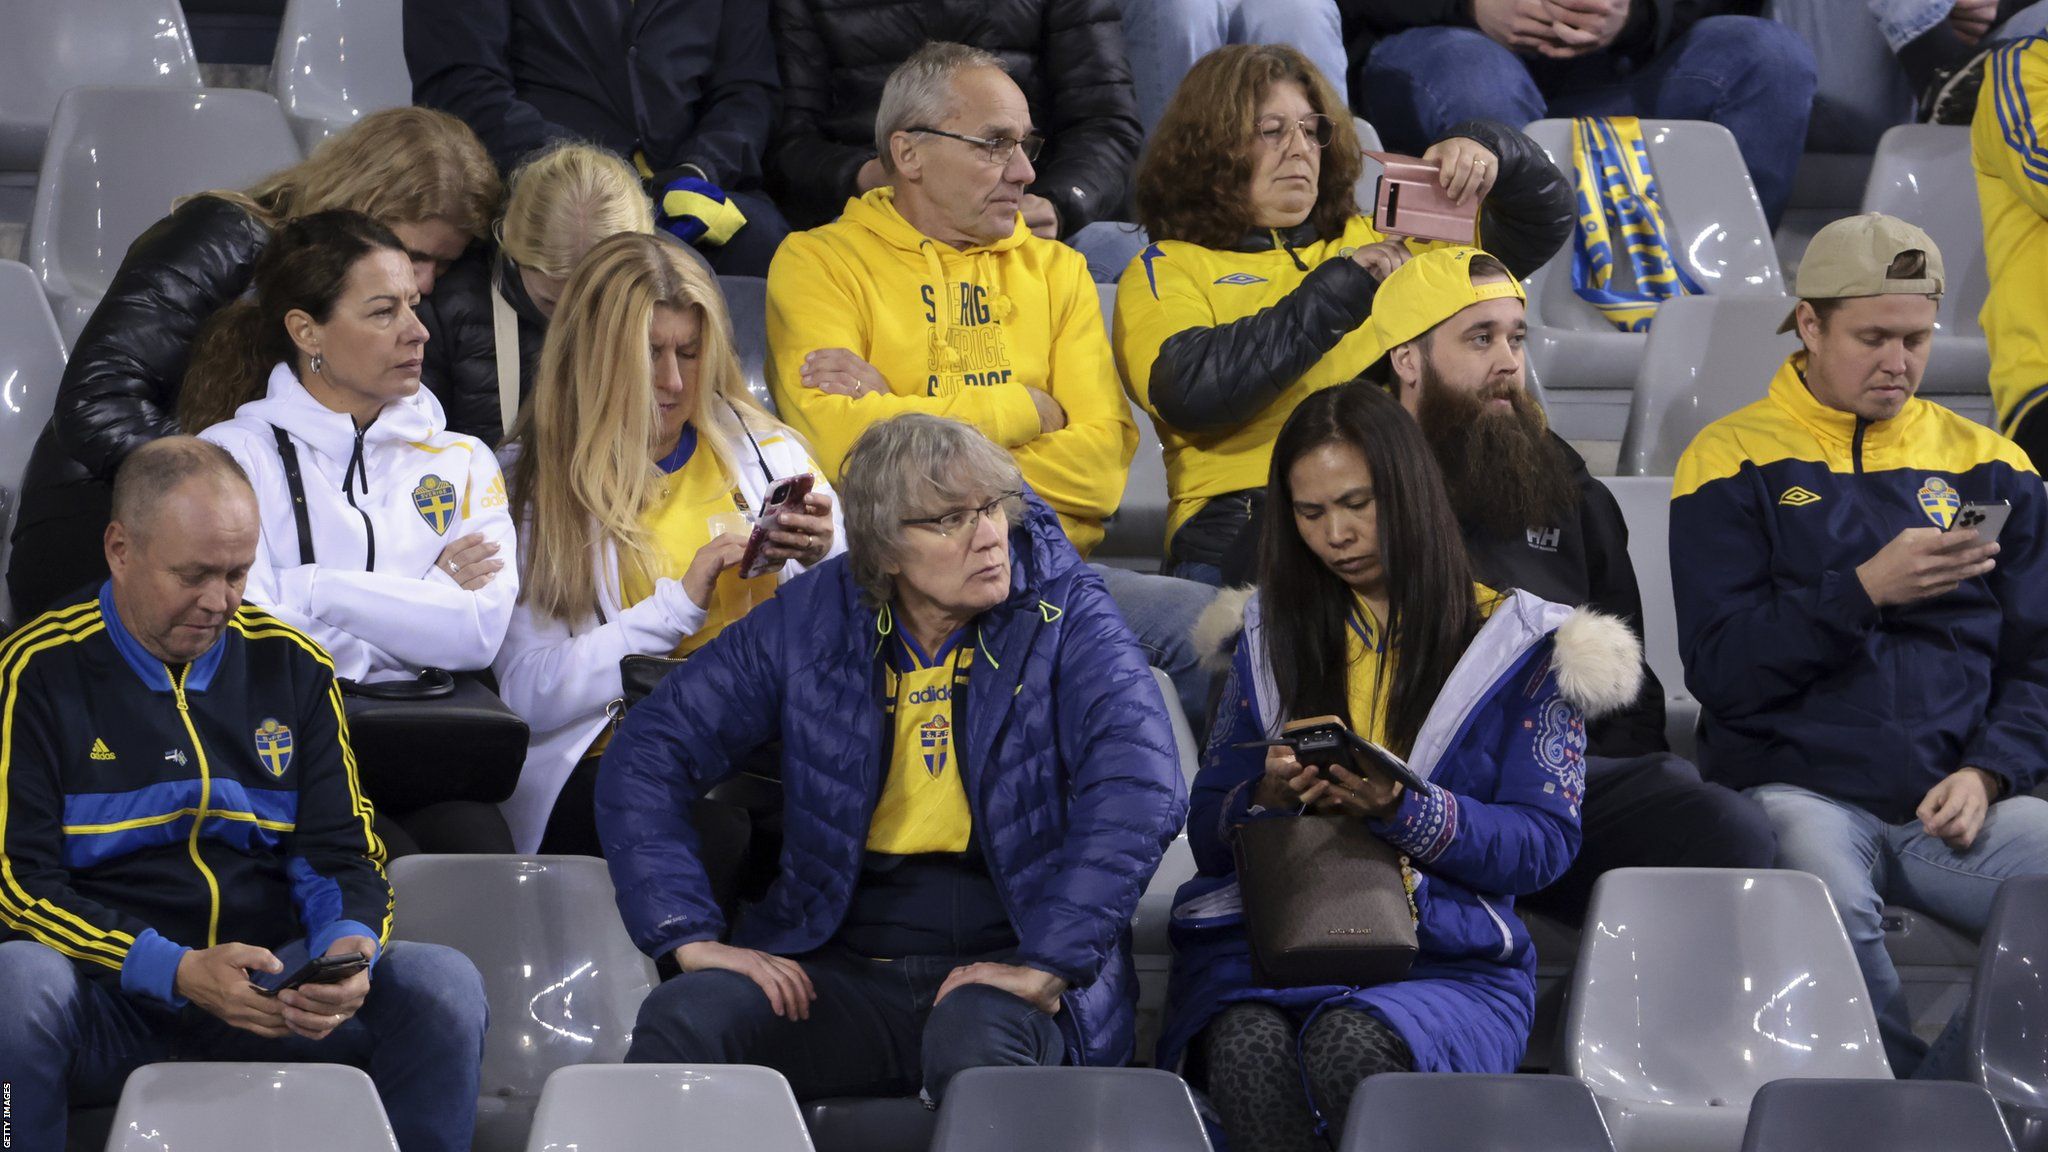 Fans of Sweden on their phones to get information on the terrorist attack in Brussels during the Euro 2024 qualifier match between Belgium and Sweden at King Baudouin Stadium in Brussels.